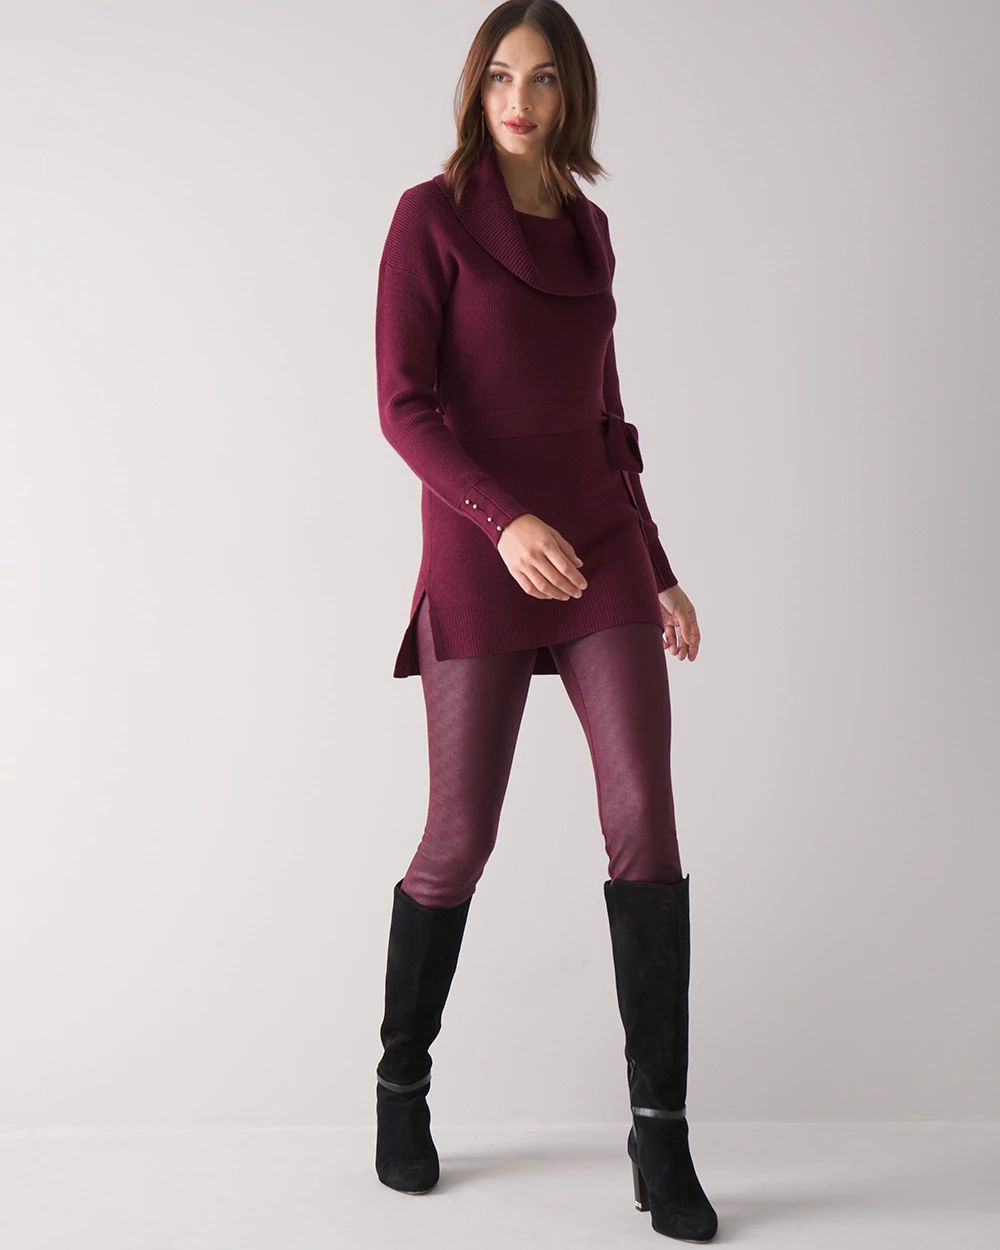 Faux Suede WHBM Runway Leggings click to view larger image.